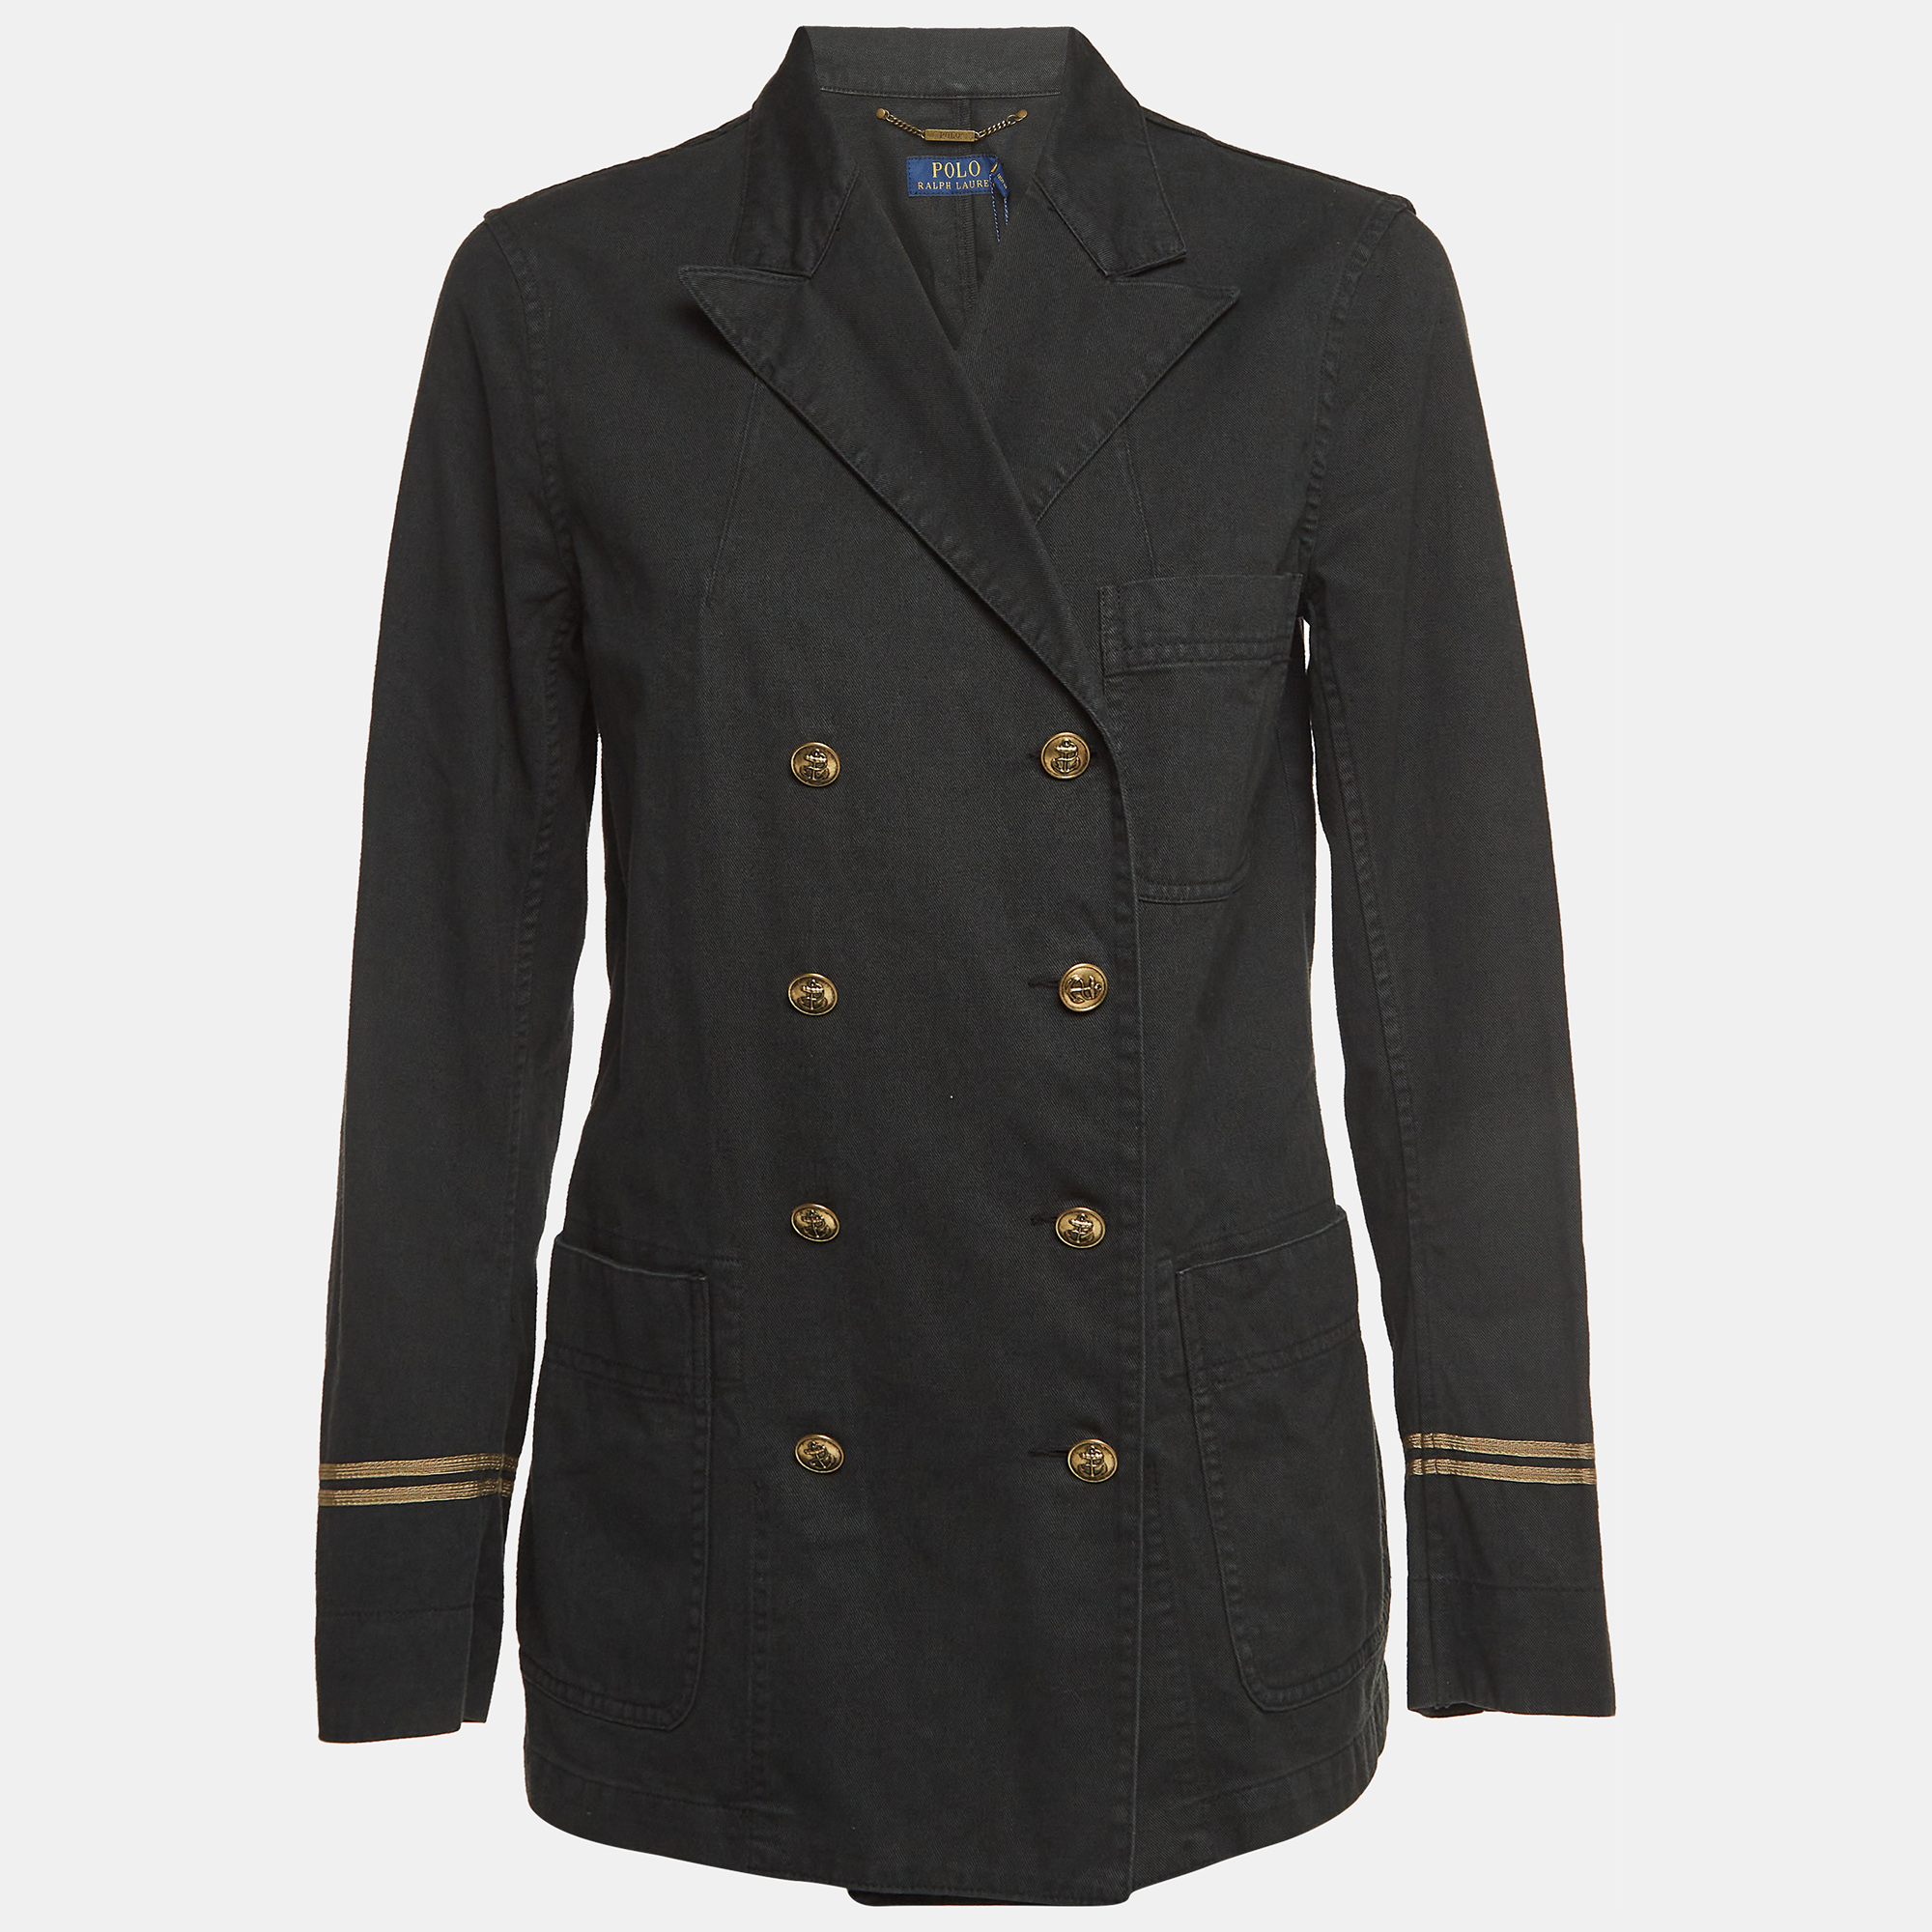 This Polo Ralph Lauren jacket offers the satisfaction of a comfortable fit and refined style. It is made of quality fabrics and designed with a double breasted front three pockets and long sleeves.